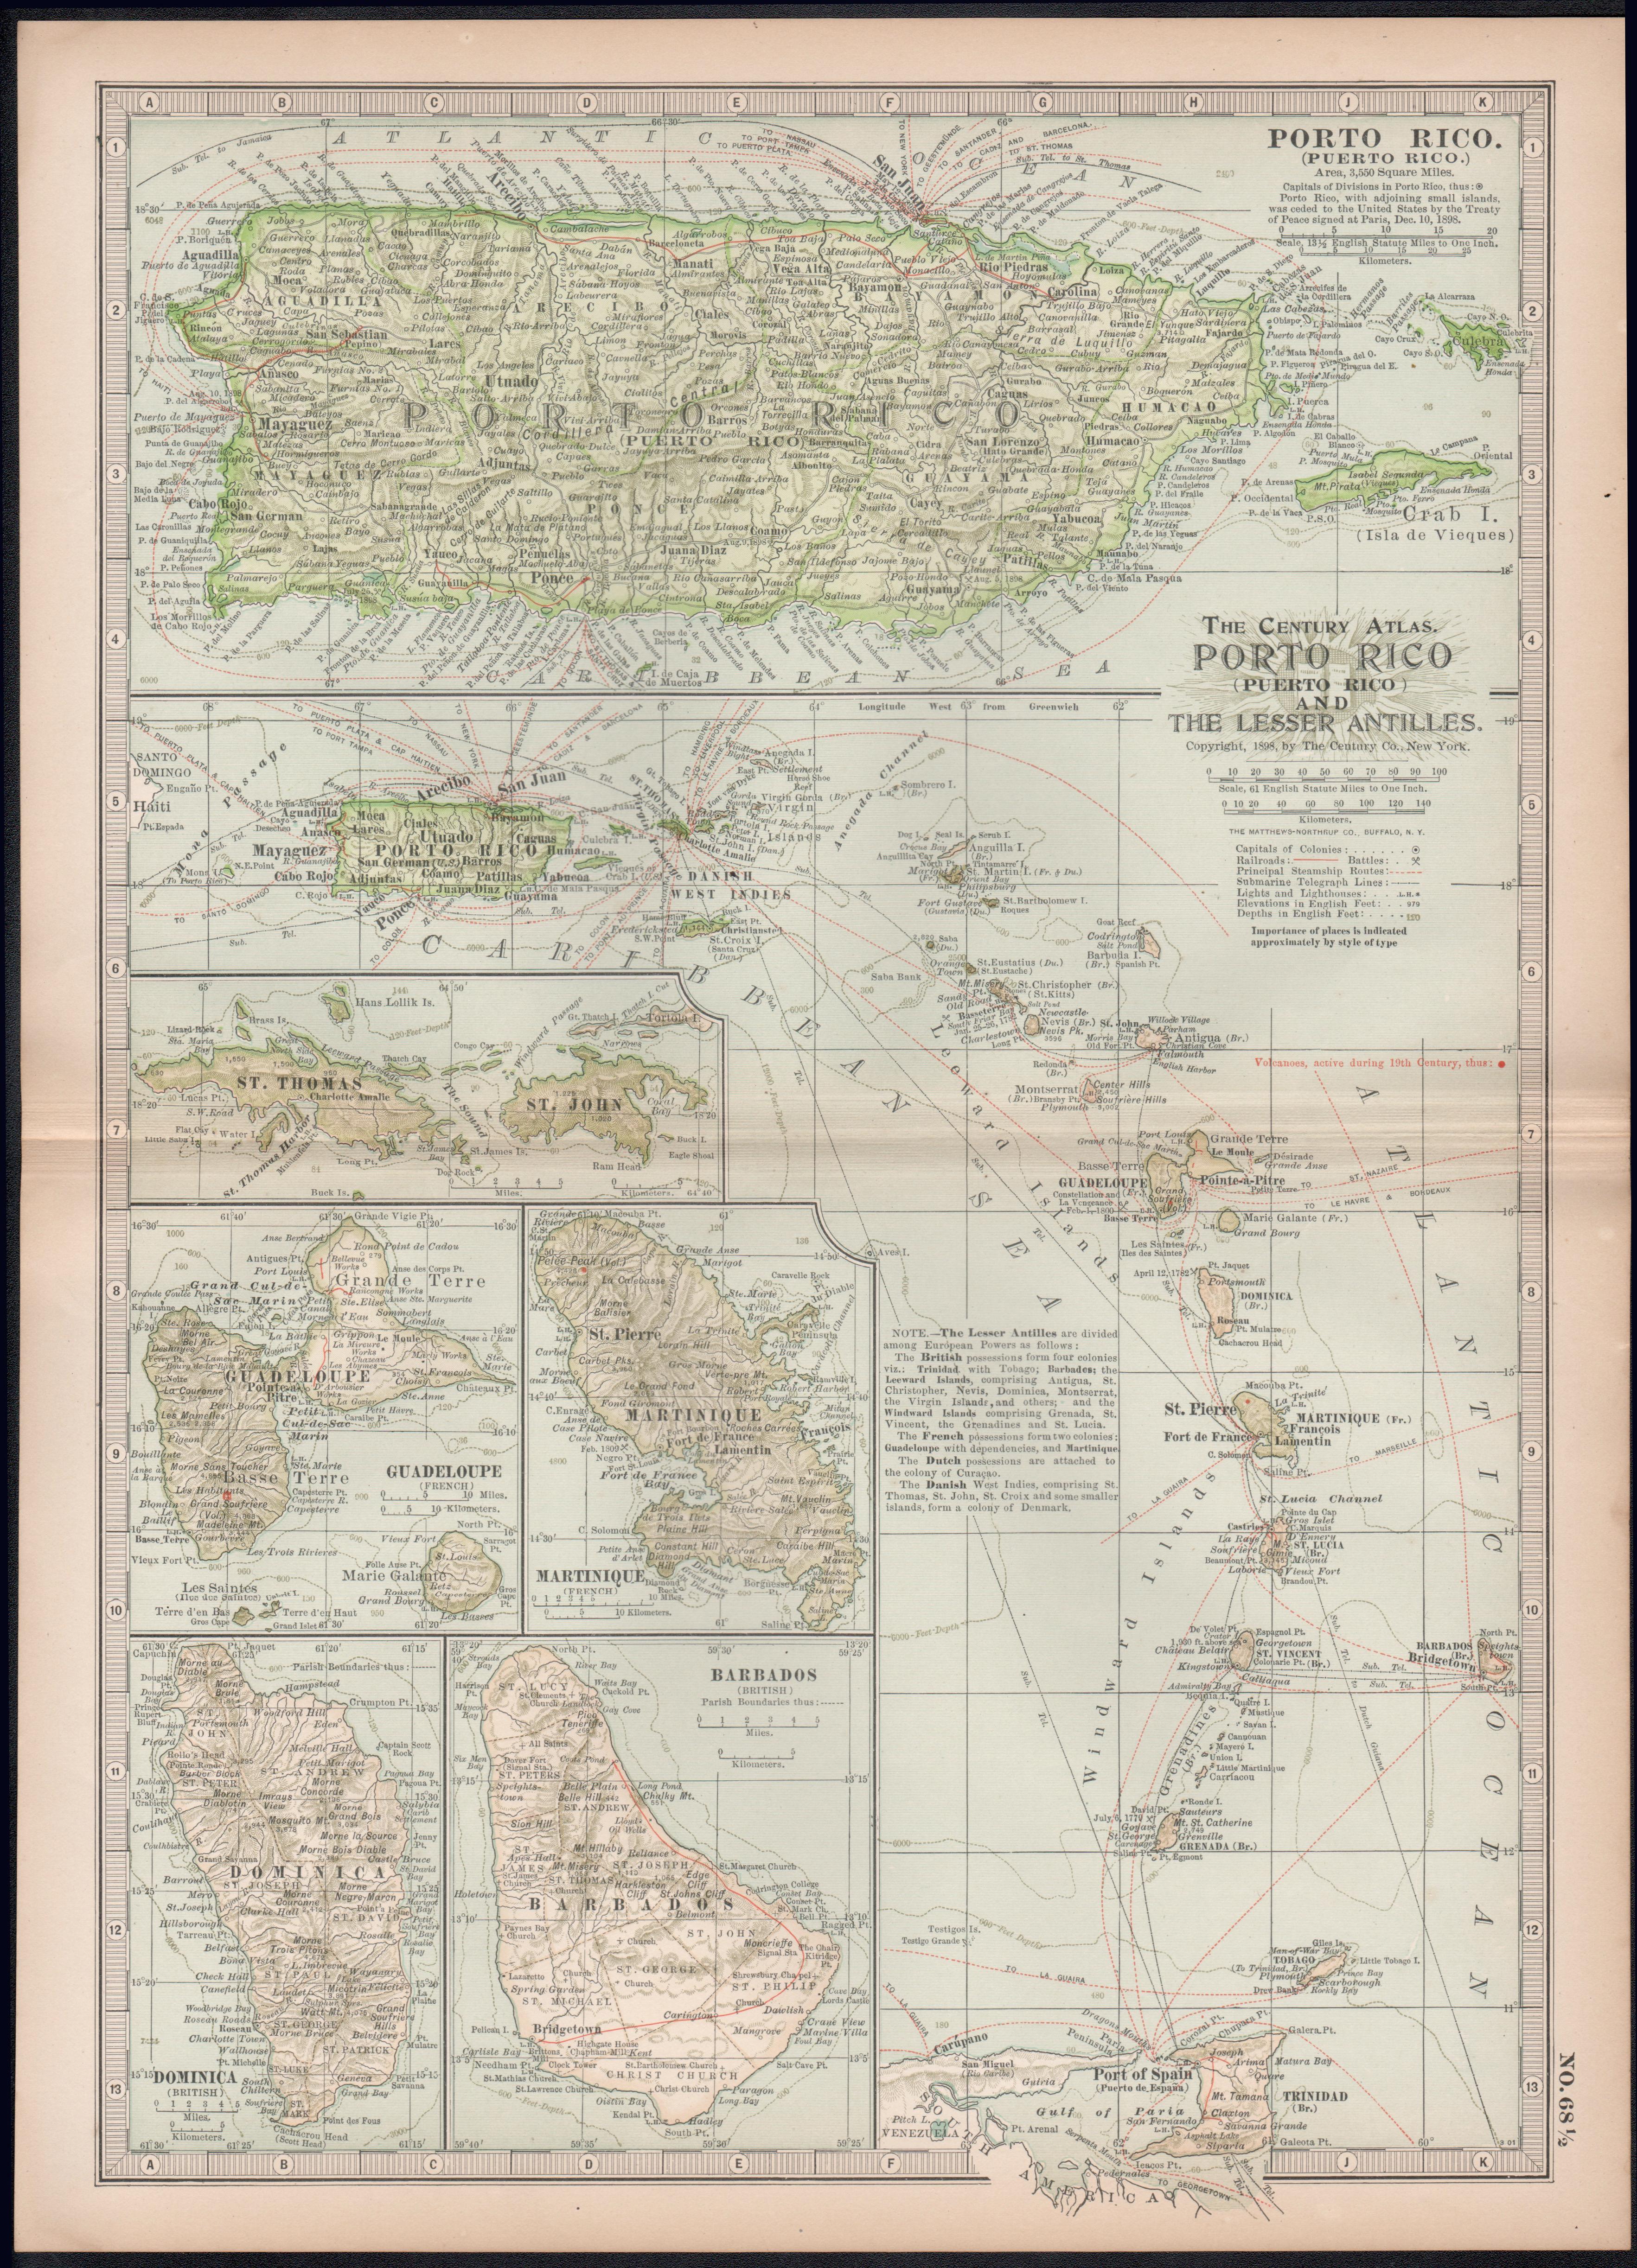 Porto Rico (Puerto Rico) and The Lesser Antilles. Century Atlas antique map - Print by Unknown